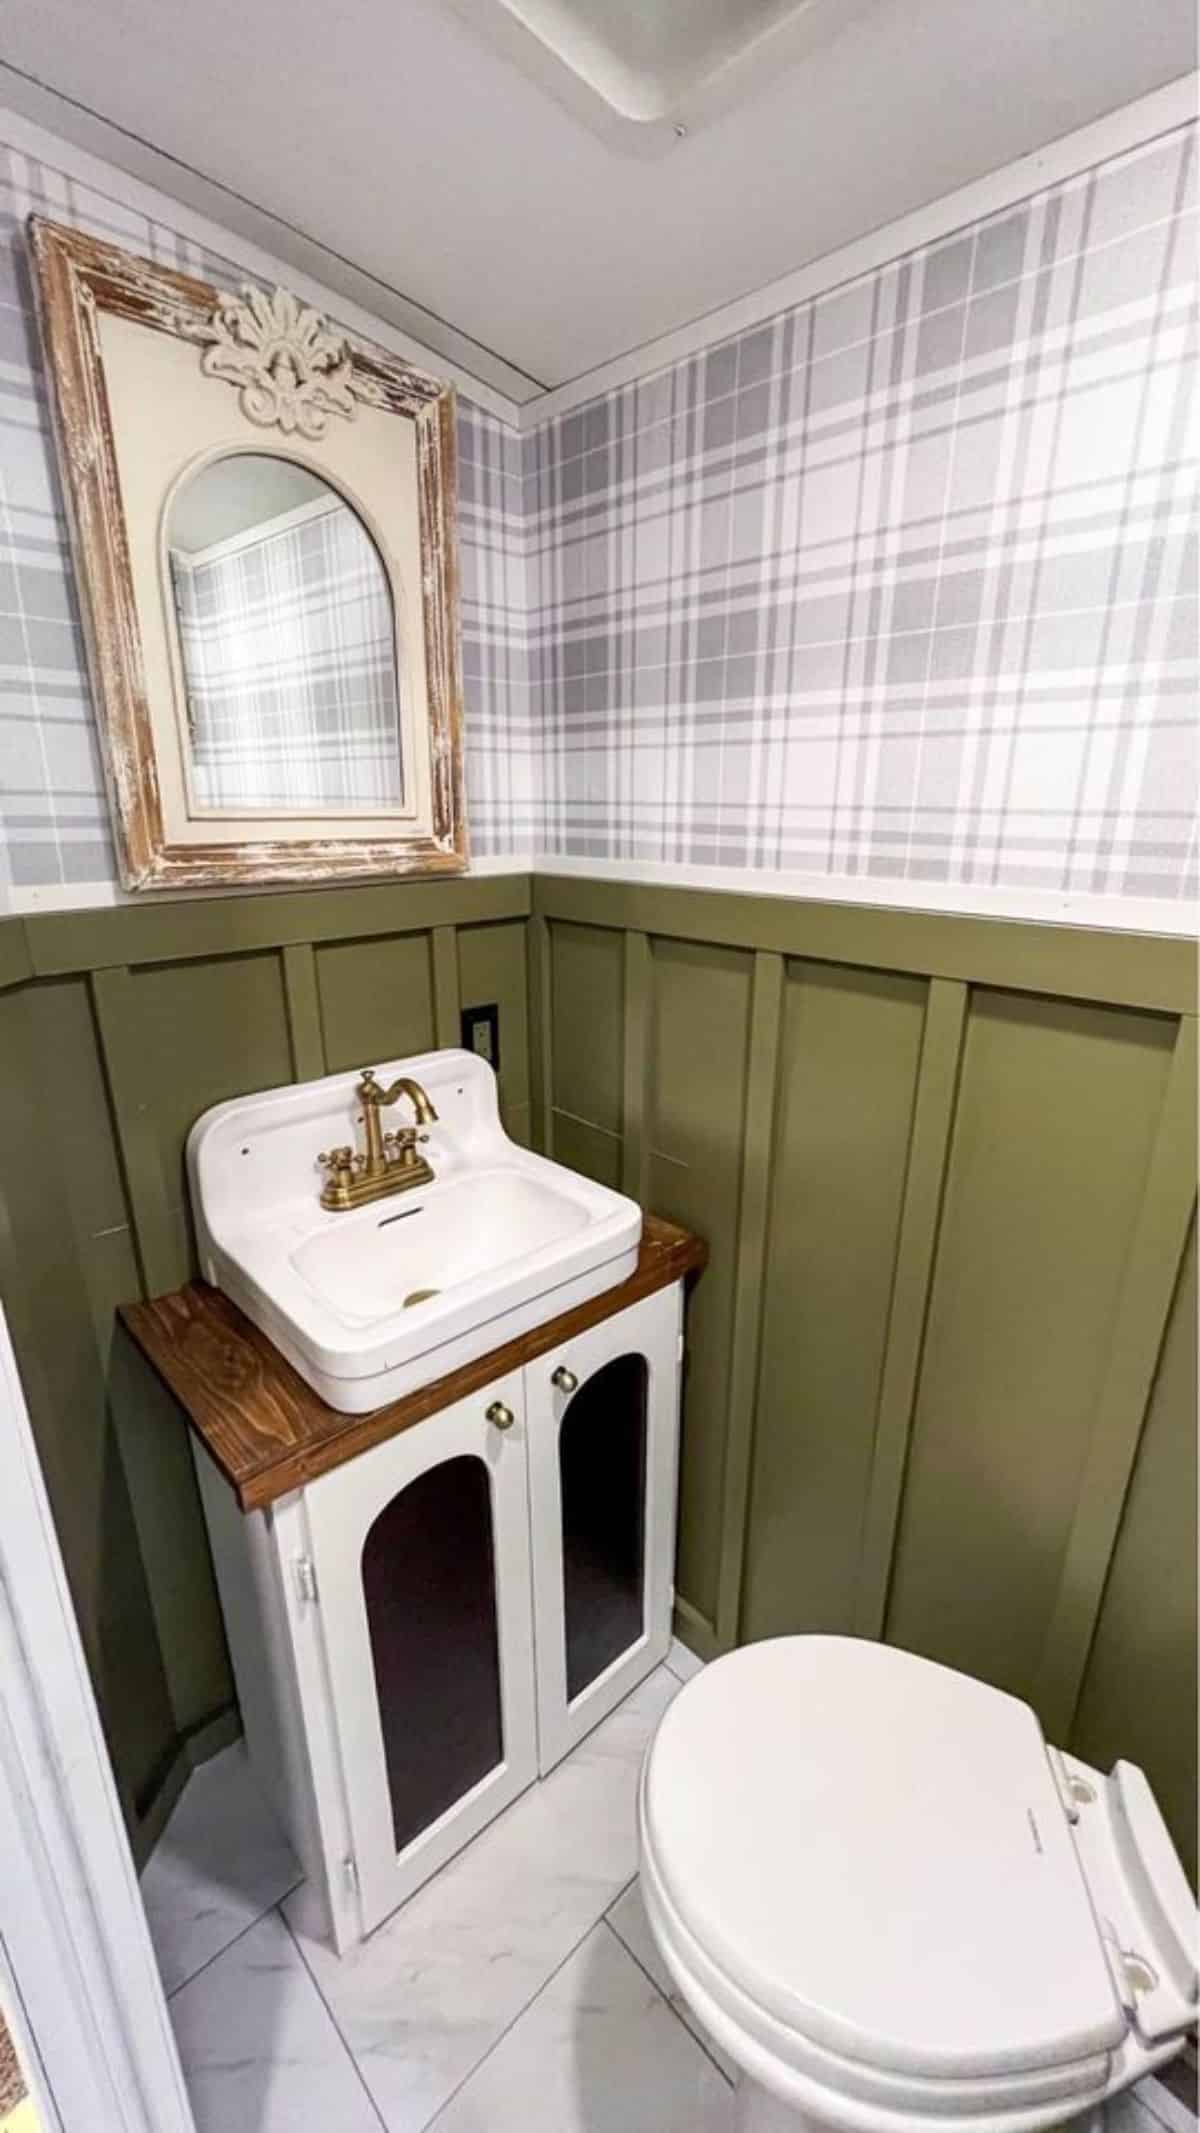 Sink with vanity & mirror and standard toilet in bathroom of 40' Tiny House